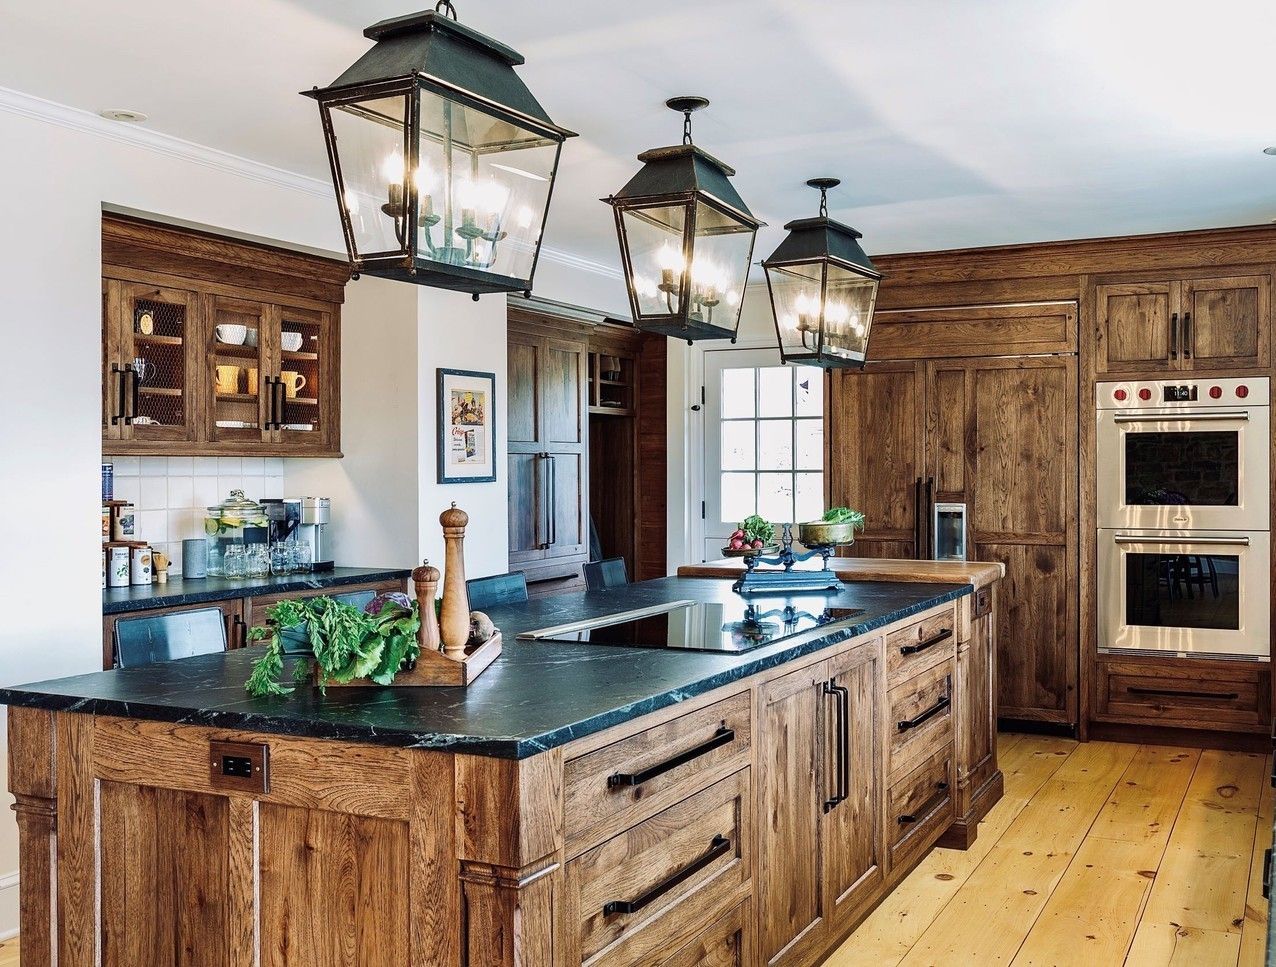 Farmhouse Rustic Kitchen Cabinets kountrykraftcabinetry